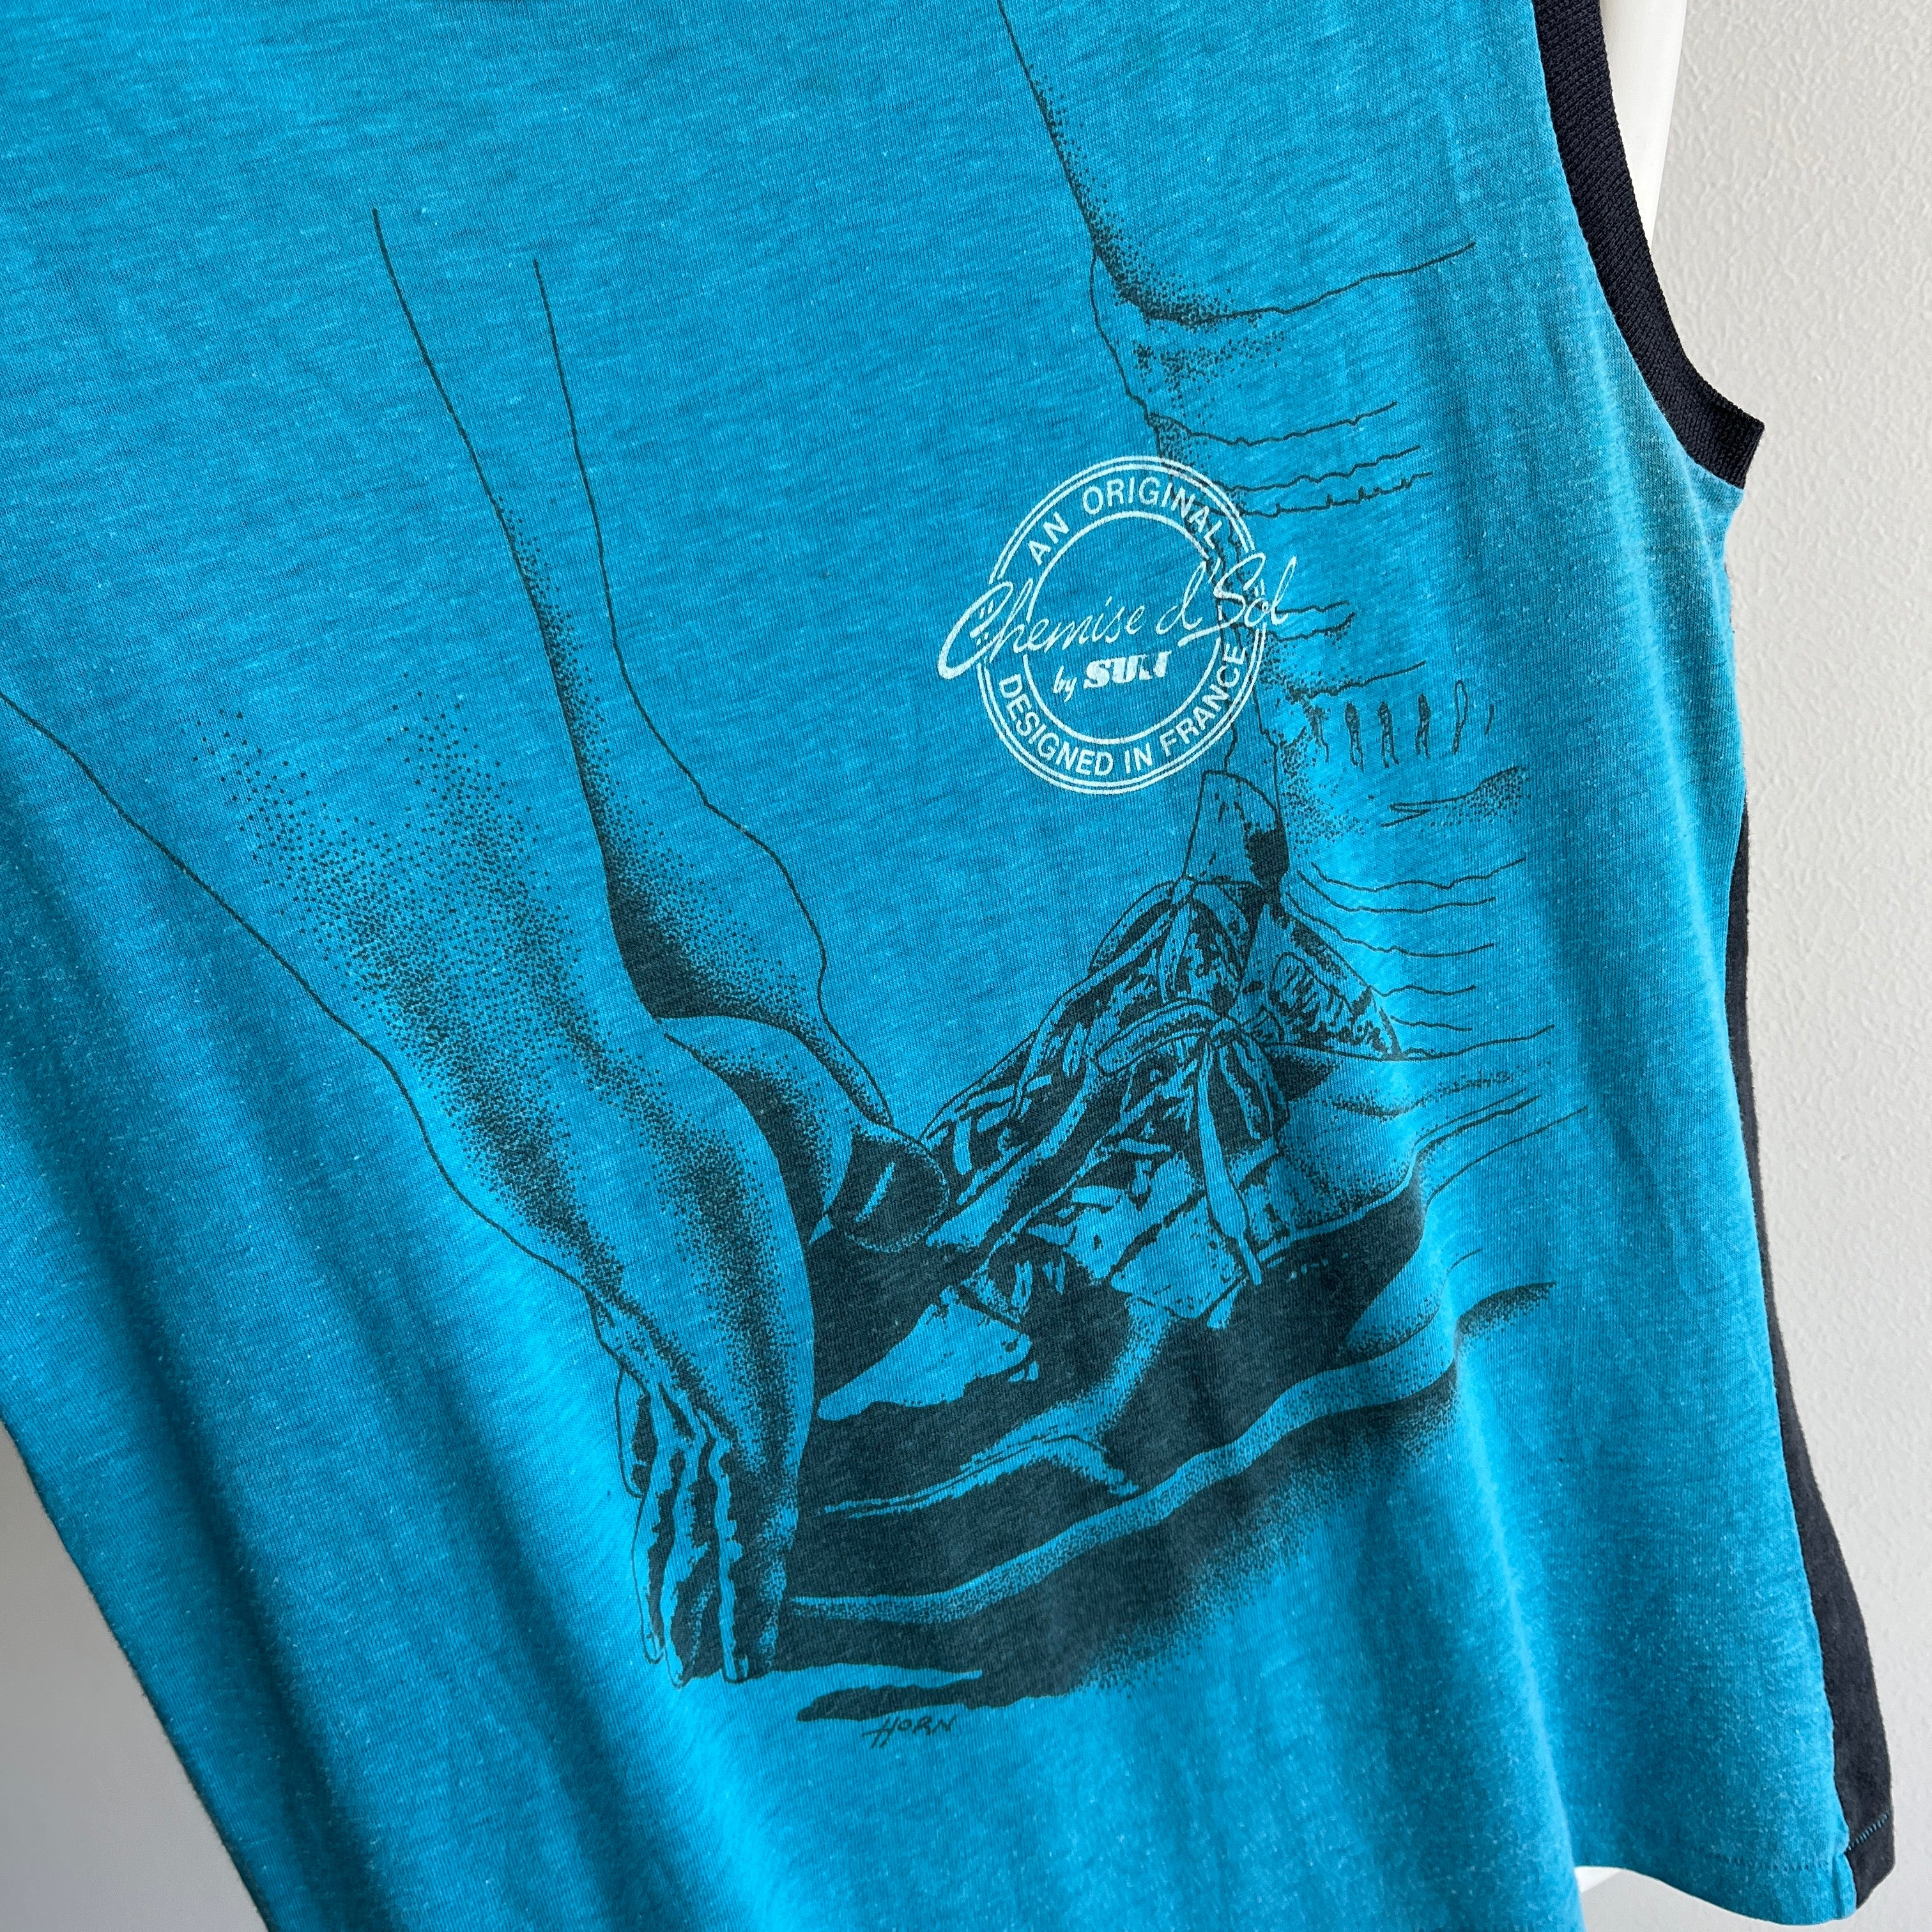 1980s Two Tone Muscle Tank 